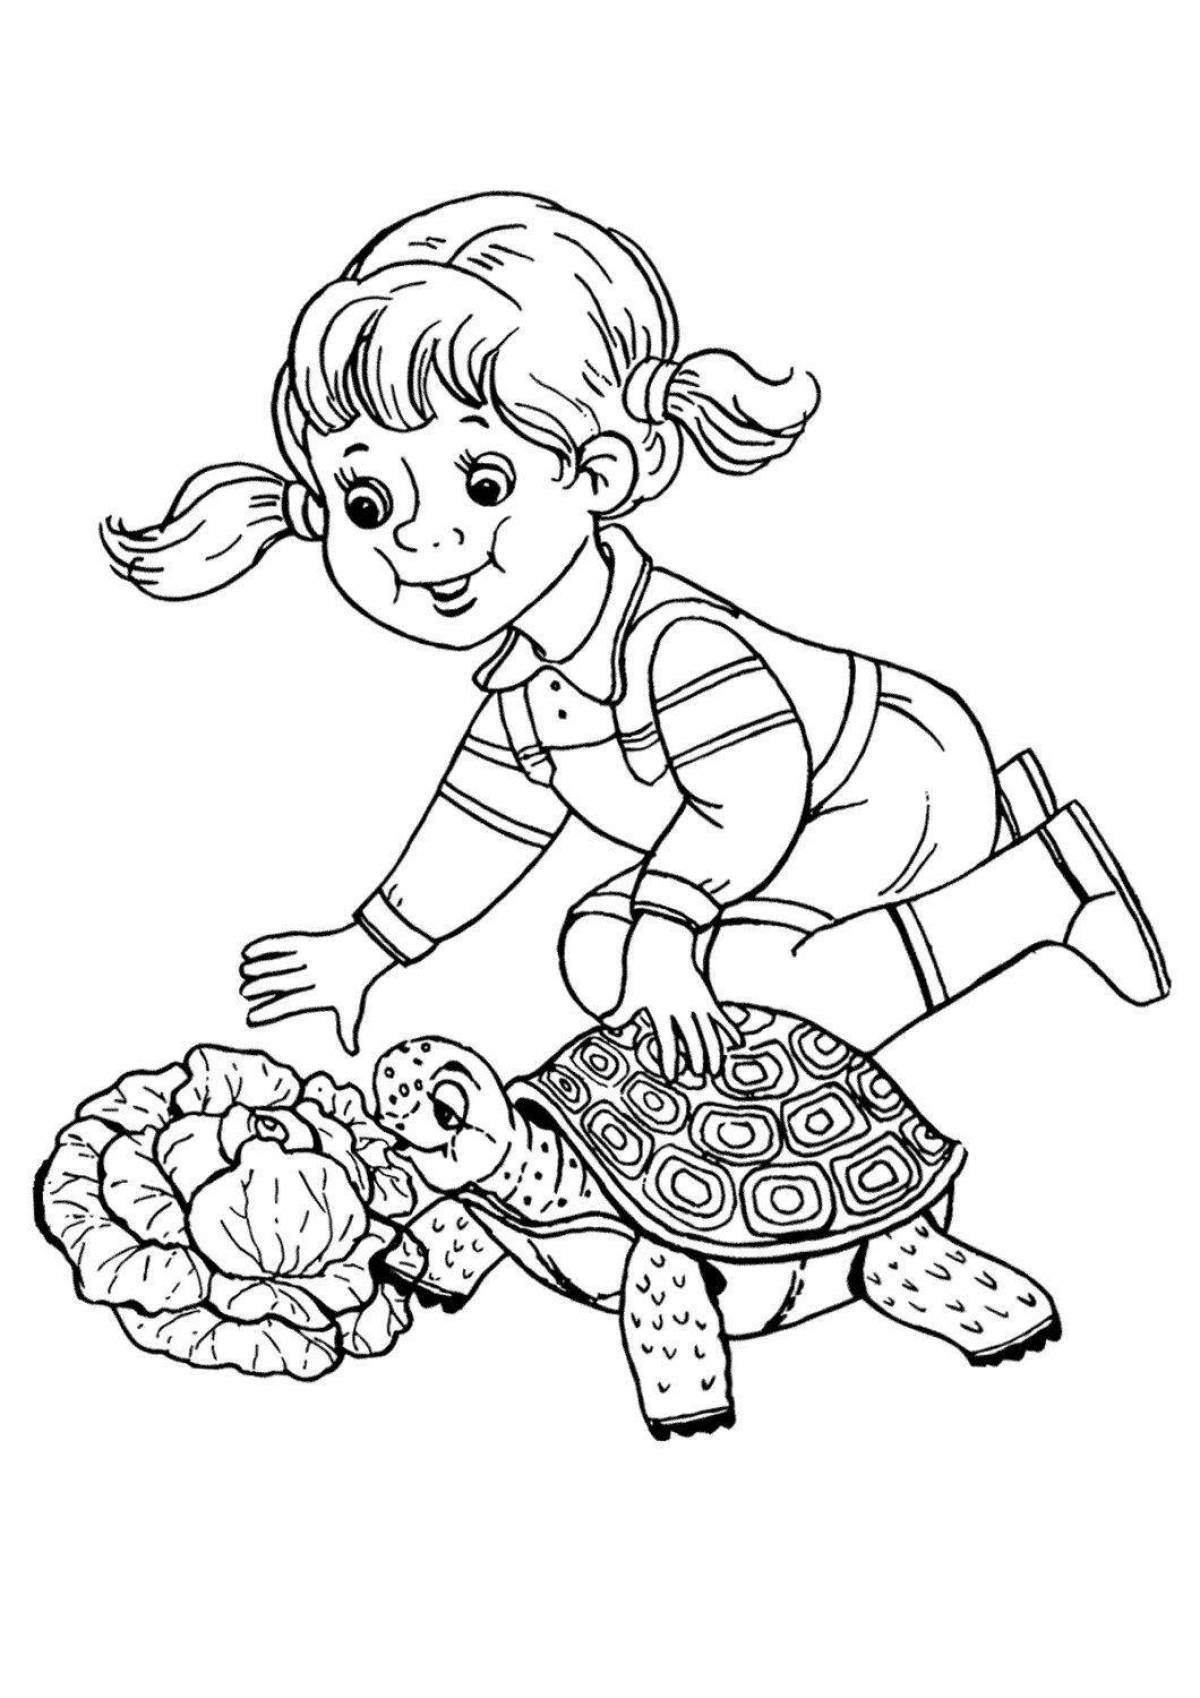 Glowing kindness coloring page